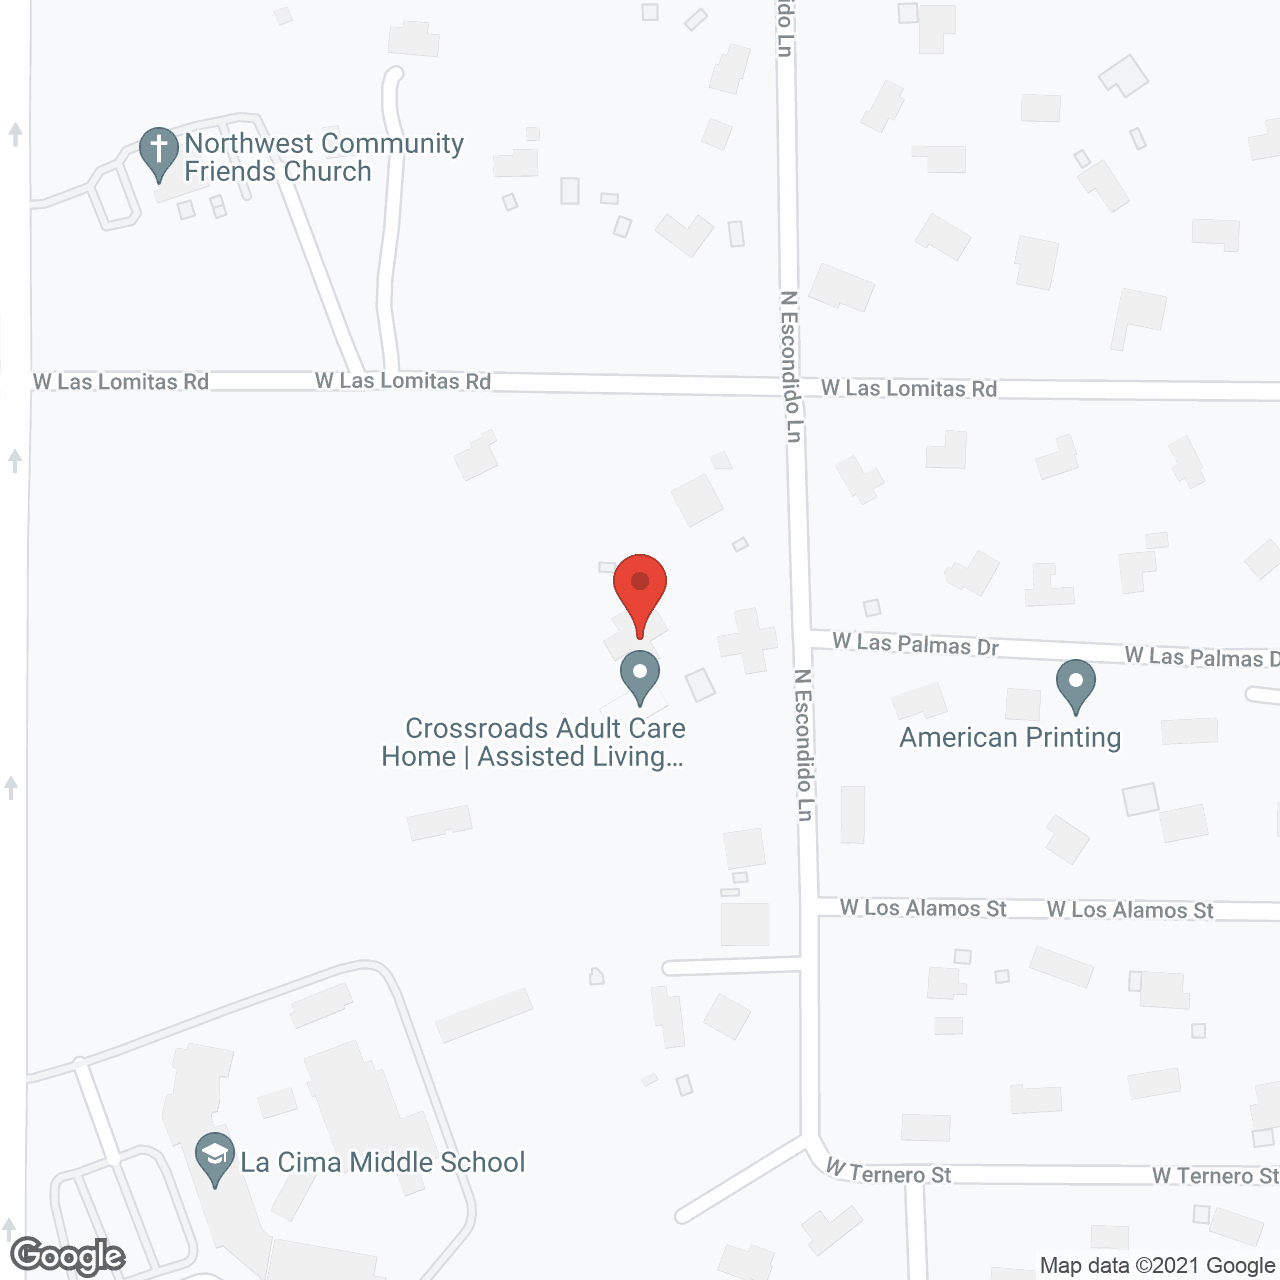 Crossroads Adult Care Homes in google map